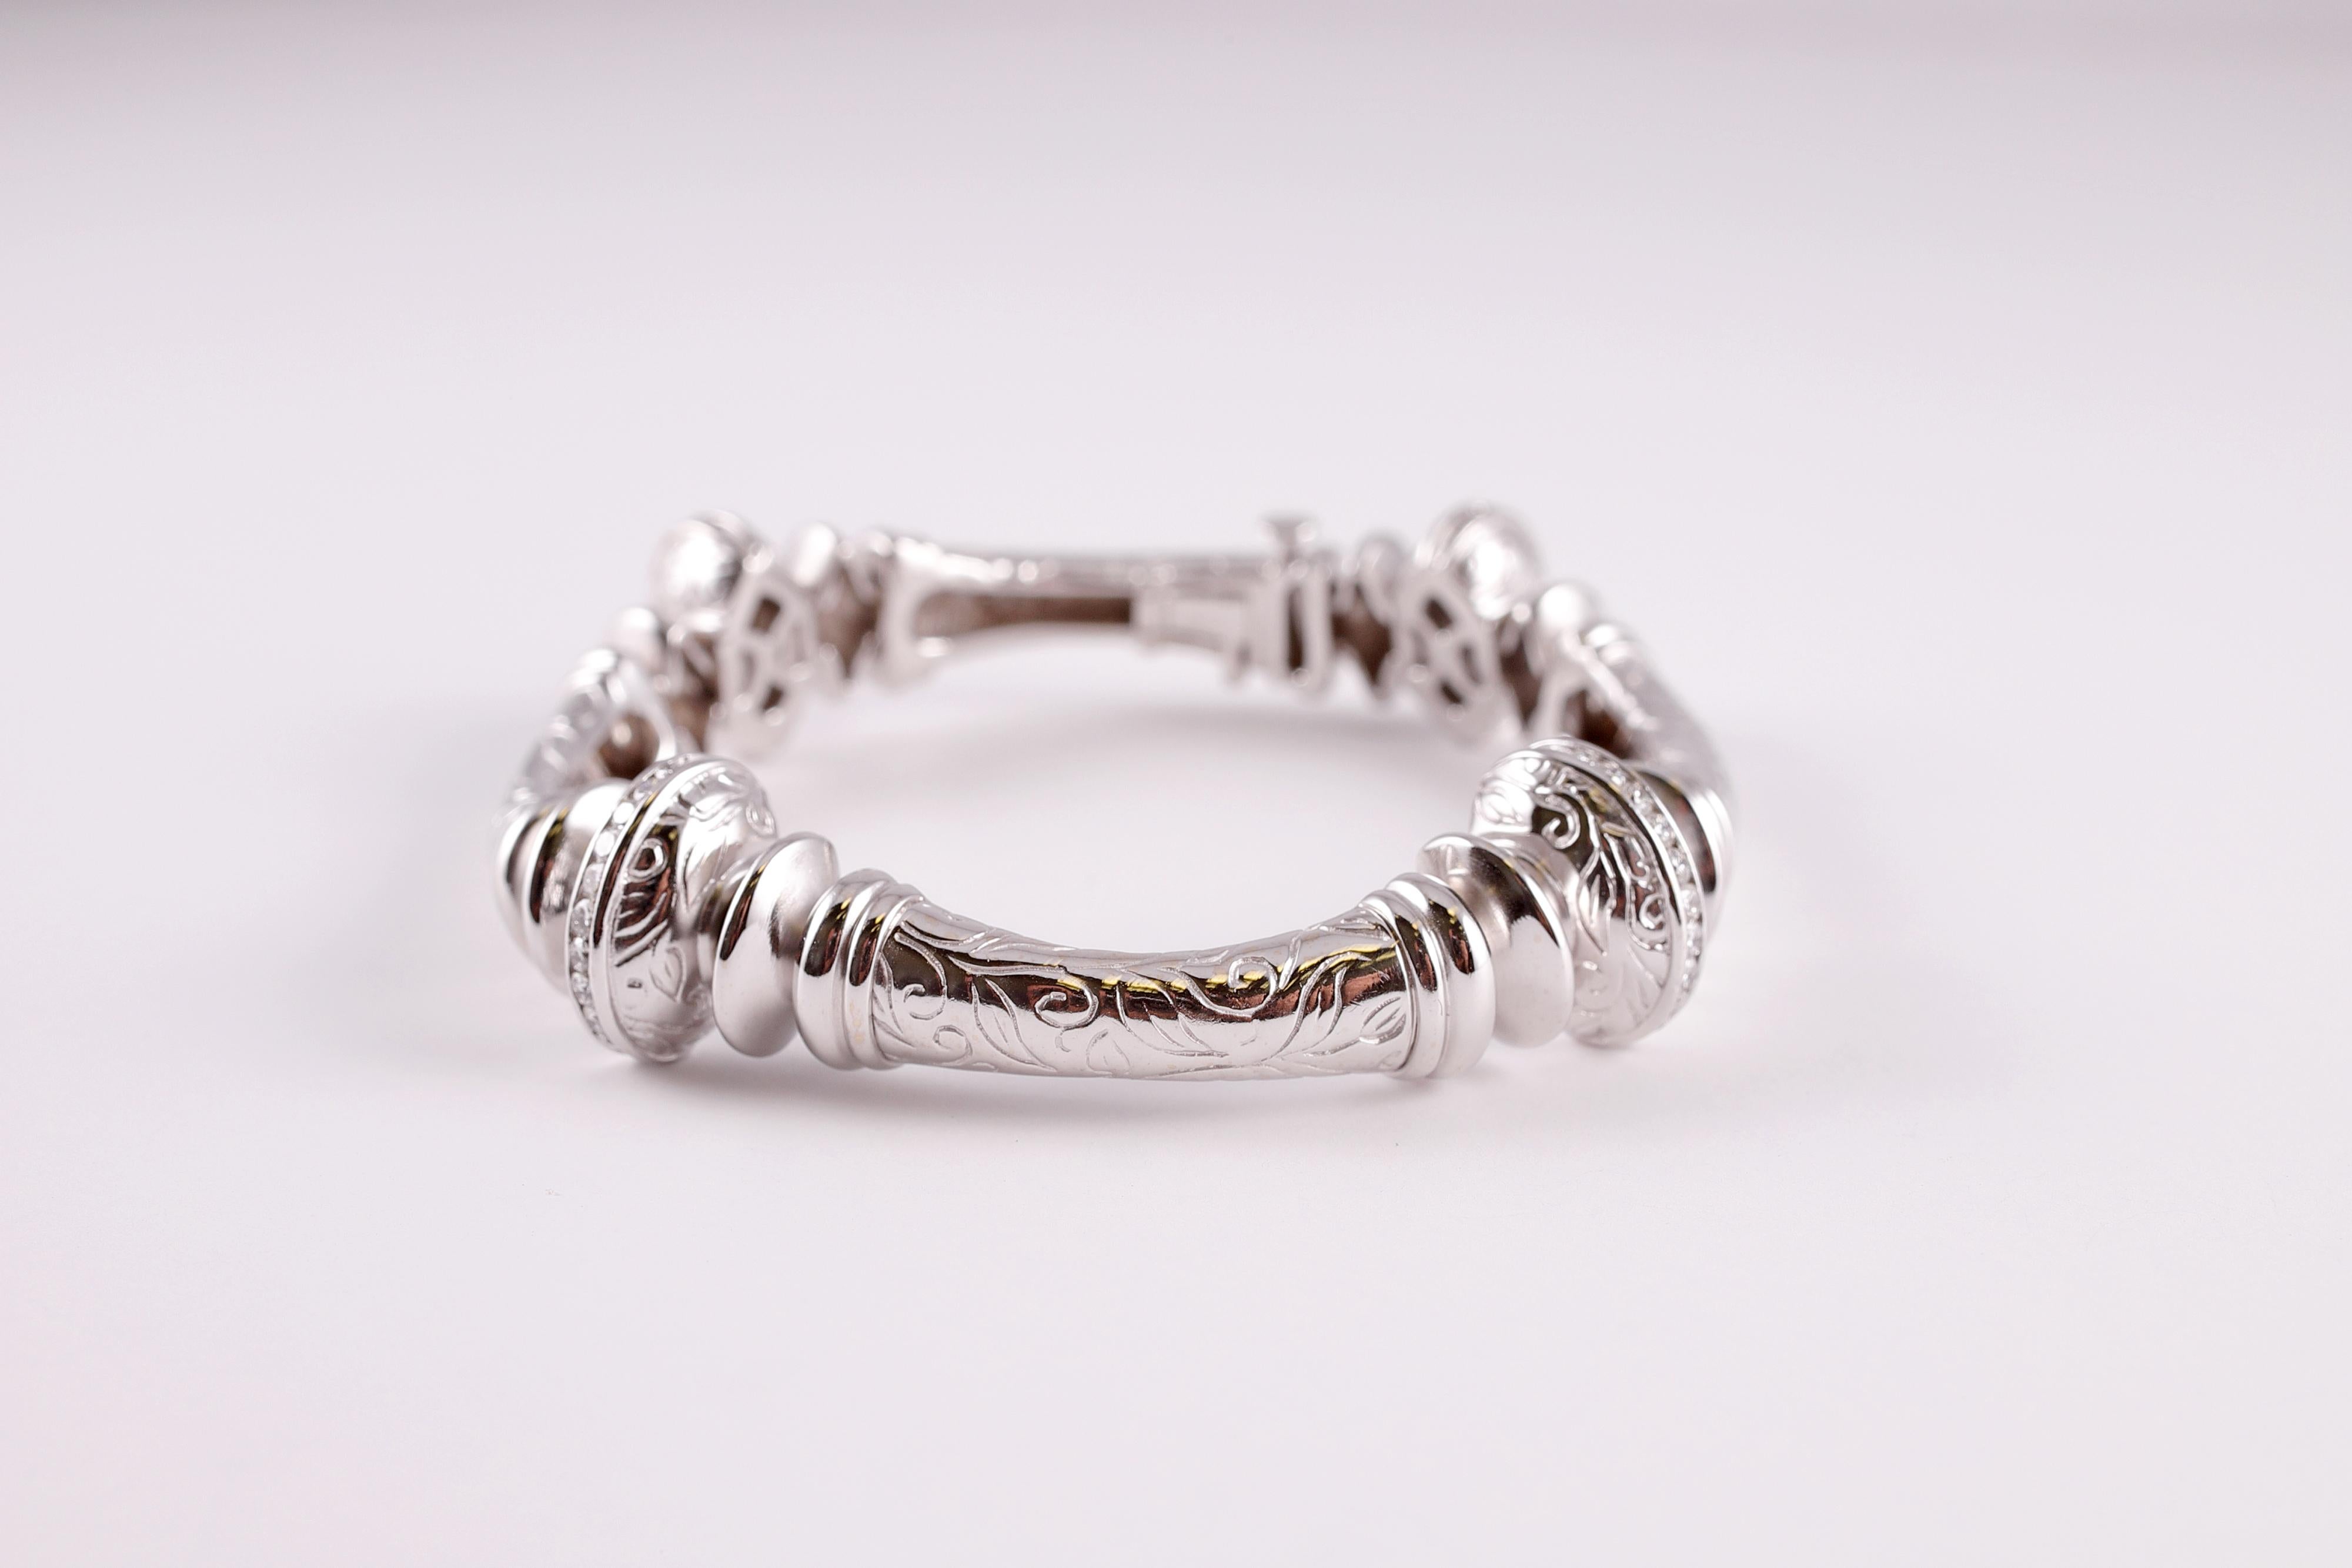 White Gold Diamond Bracelet by Seidengang from the Laurel Collection 5